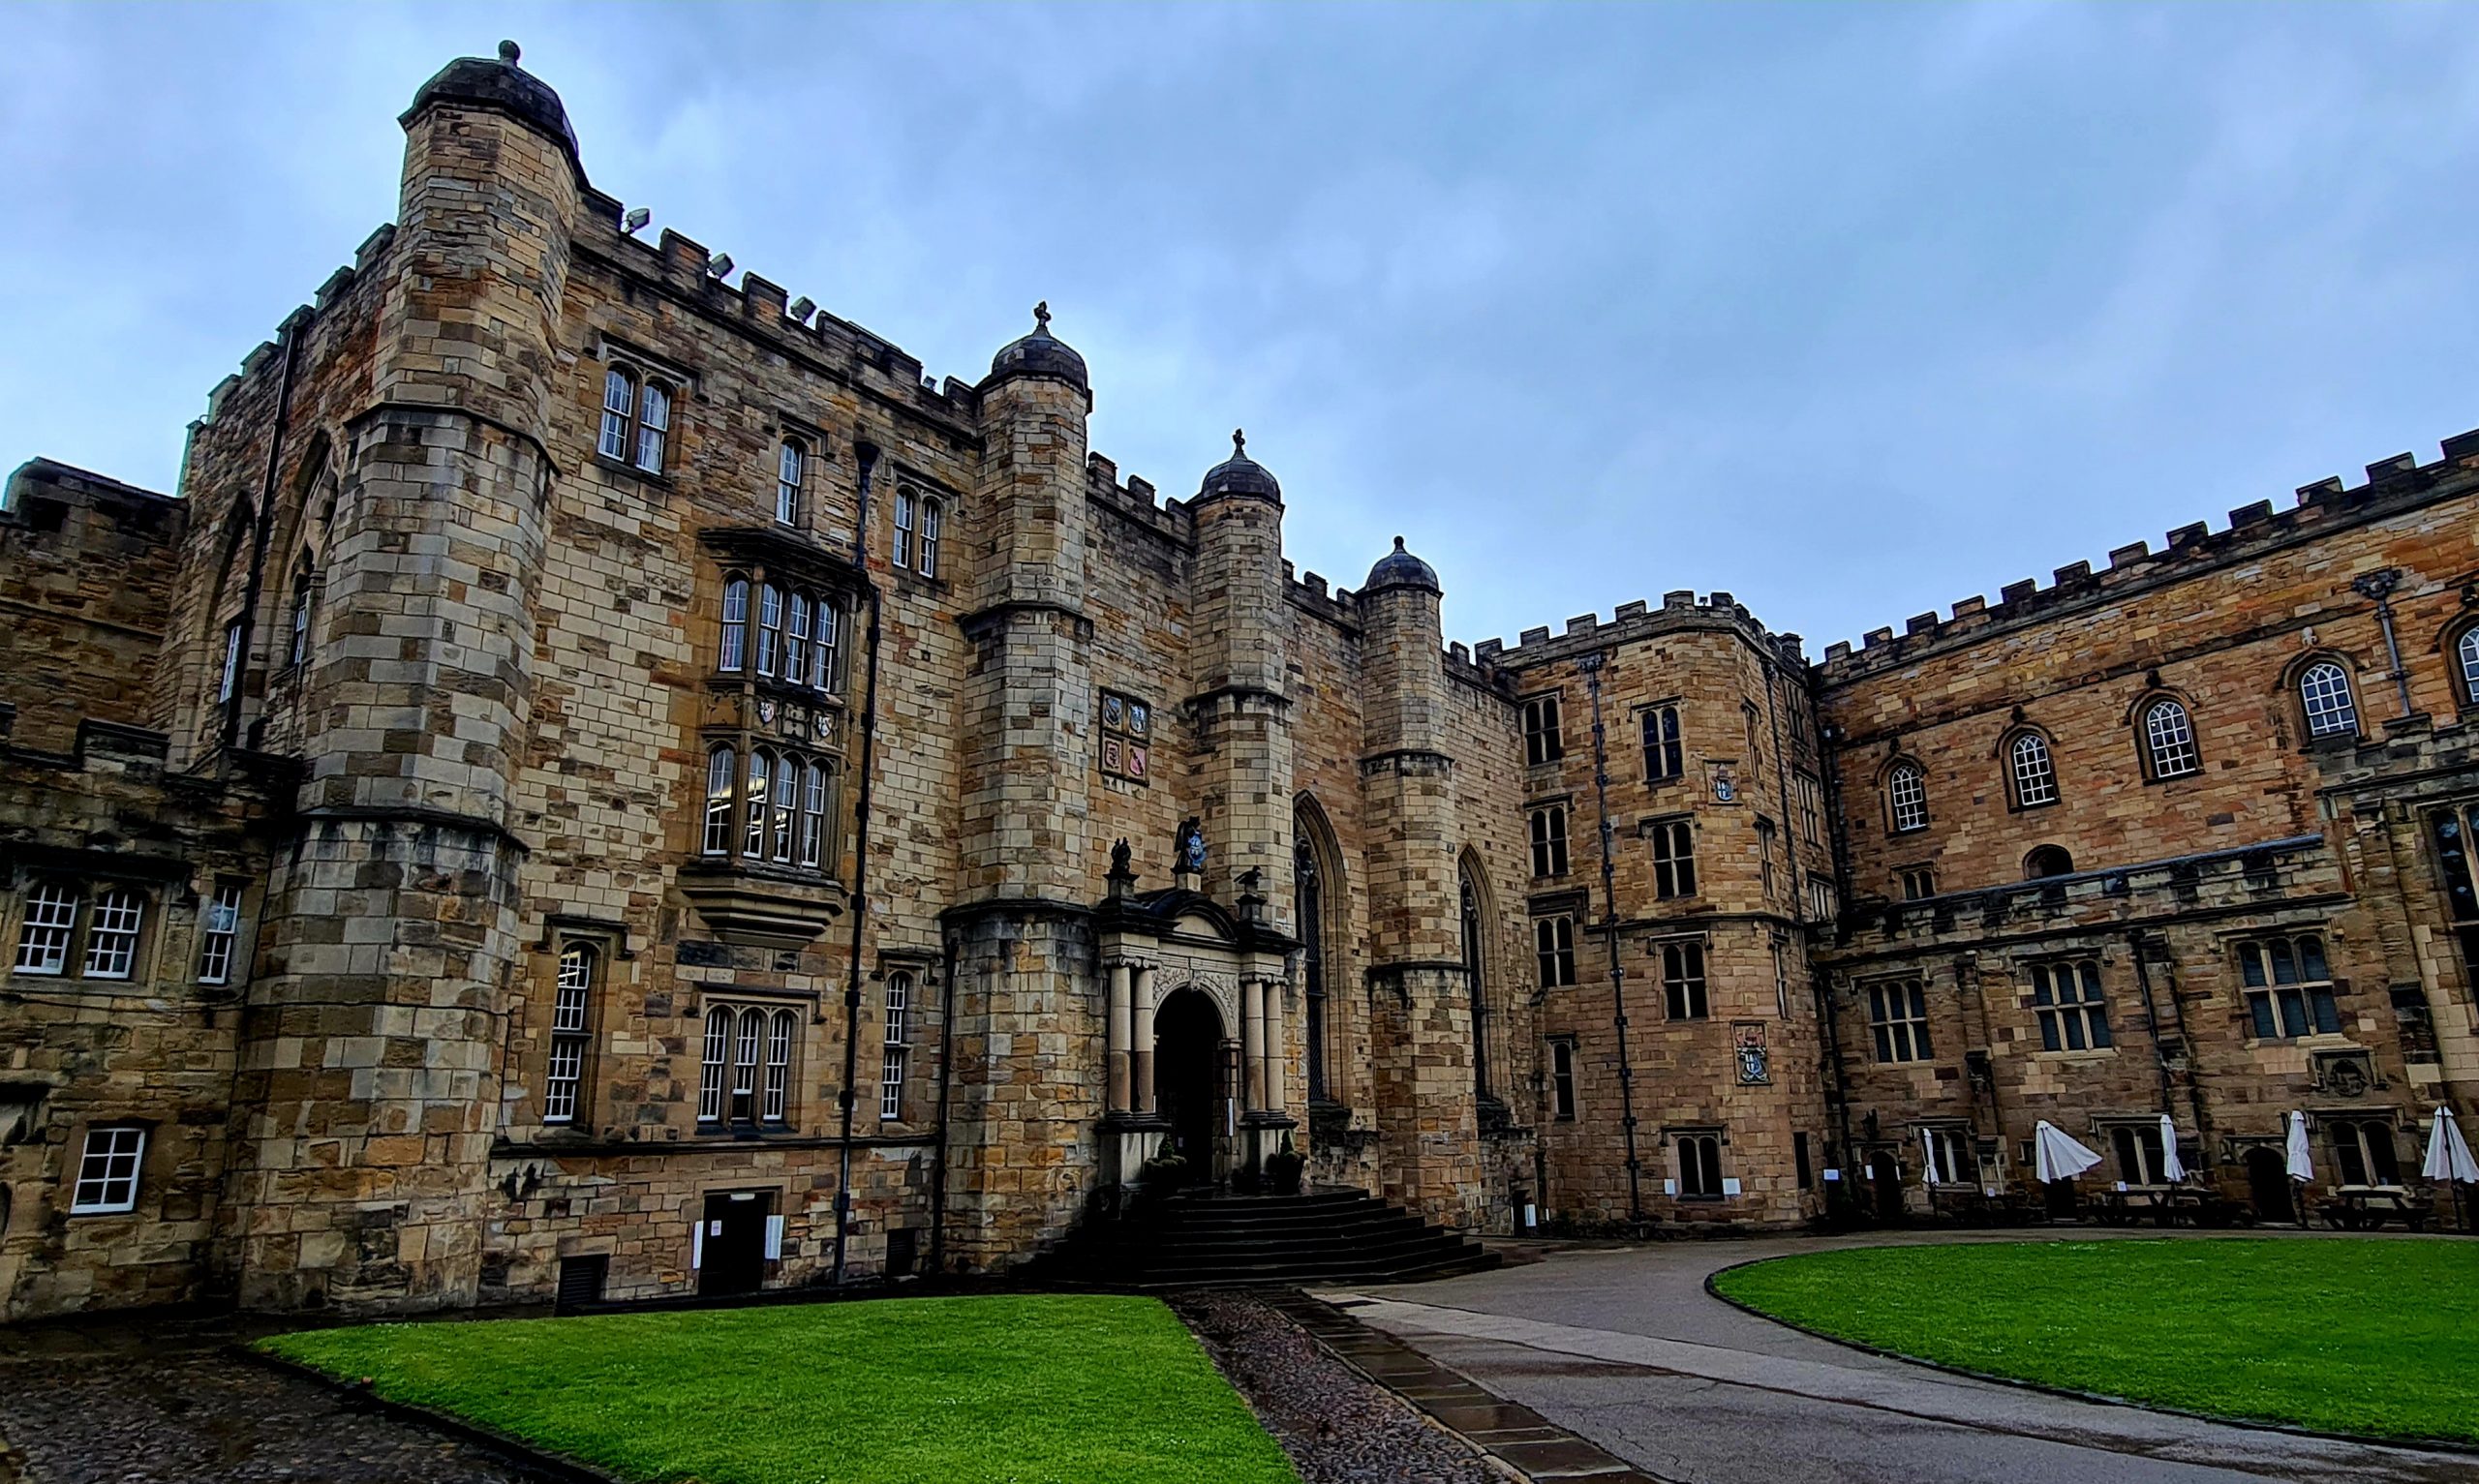 Durham castle in the United Kingdom